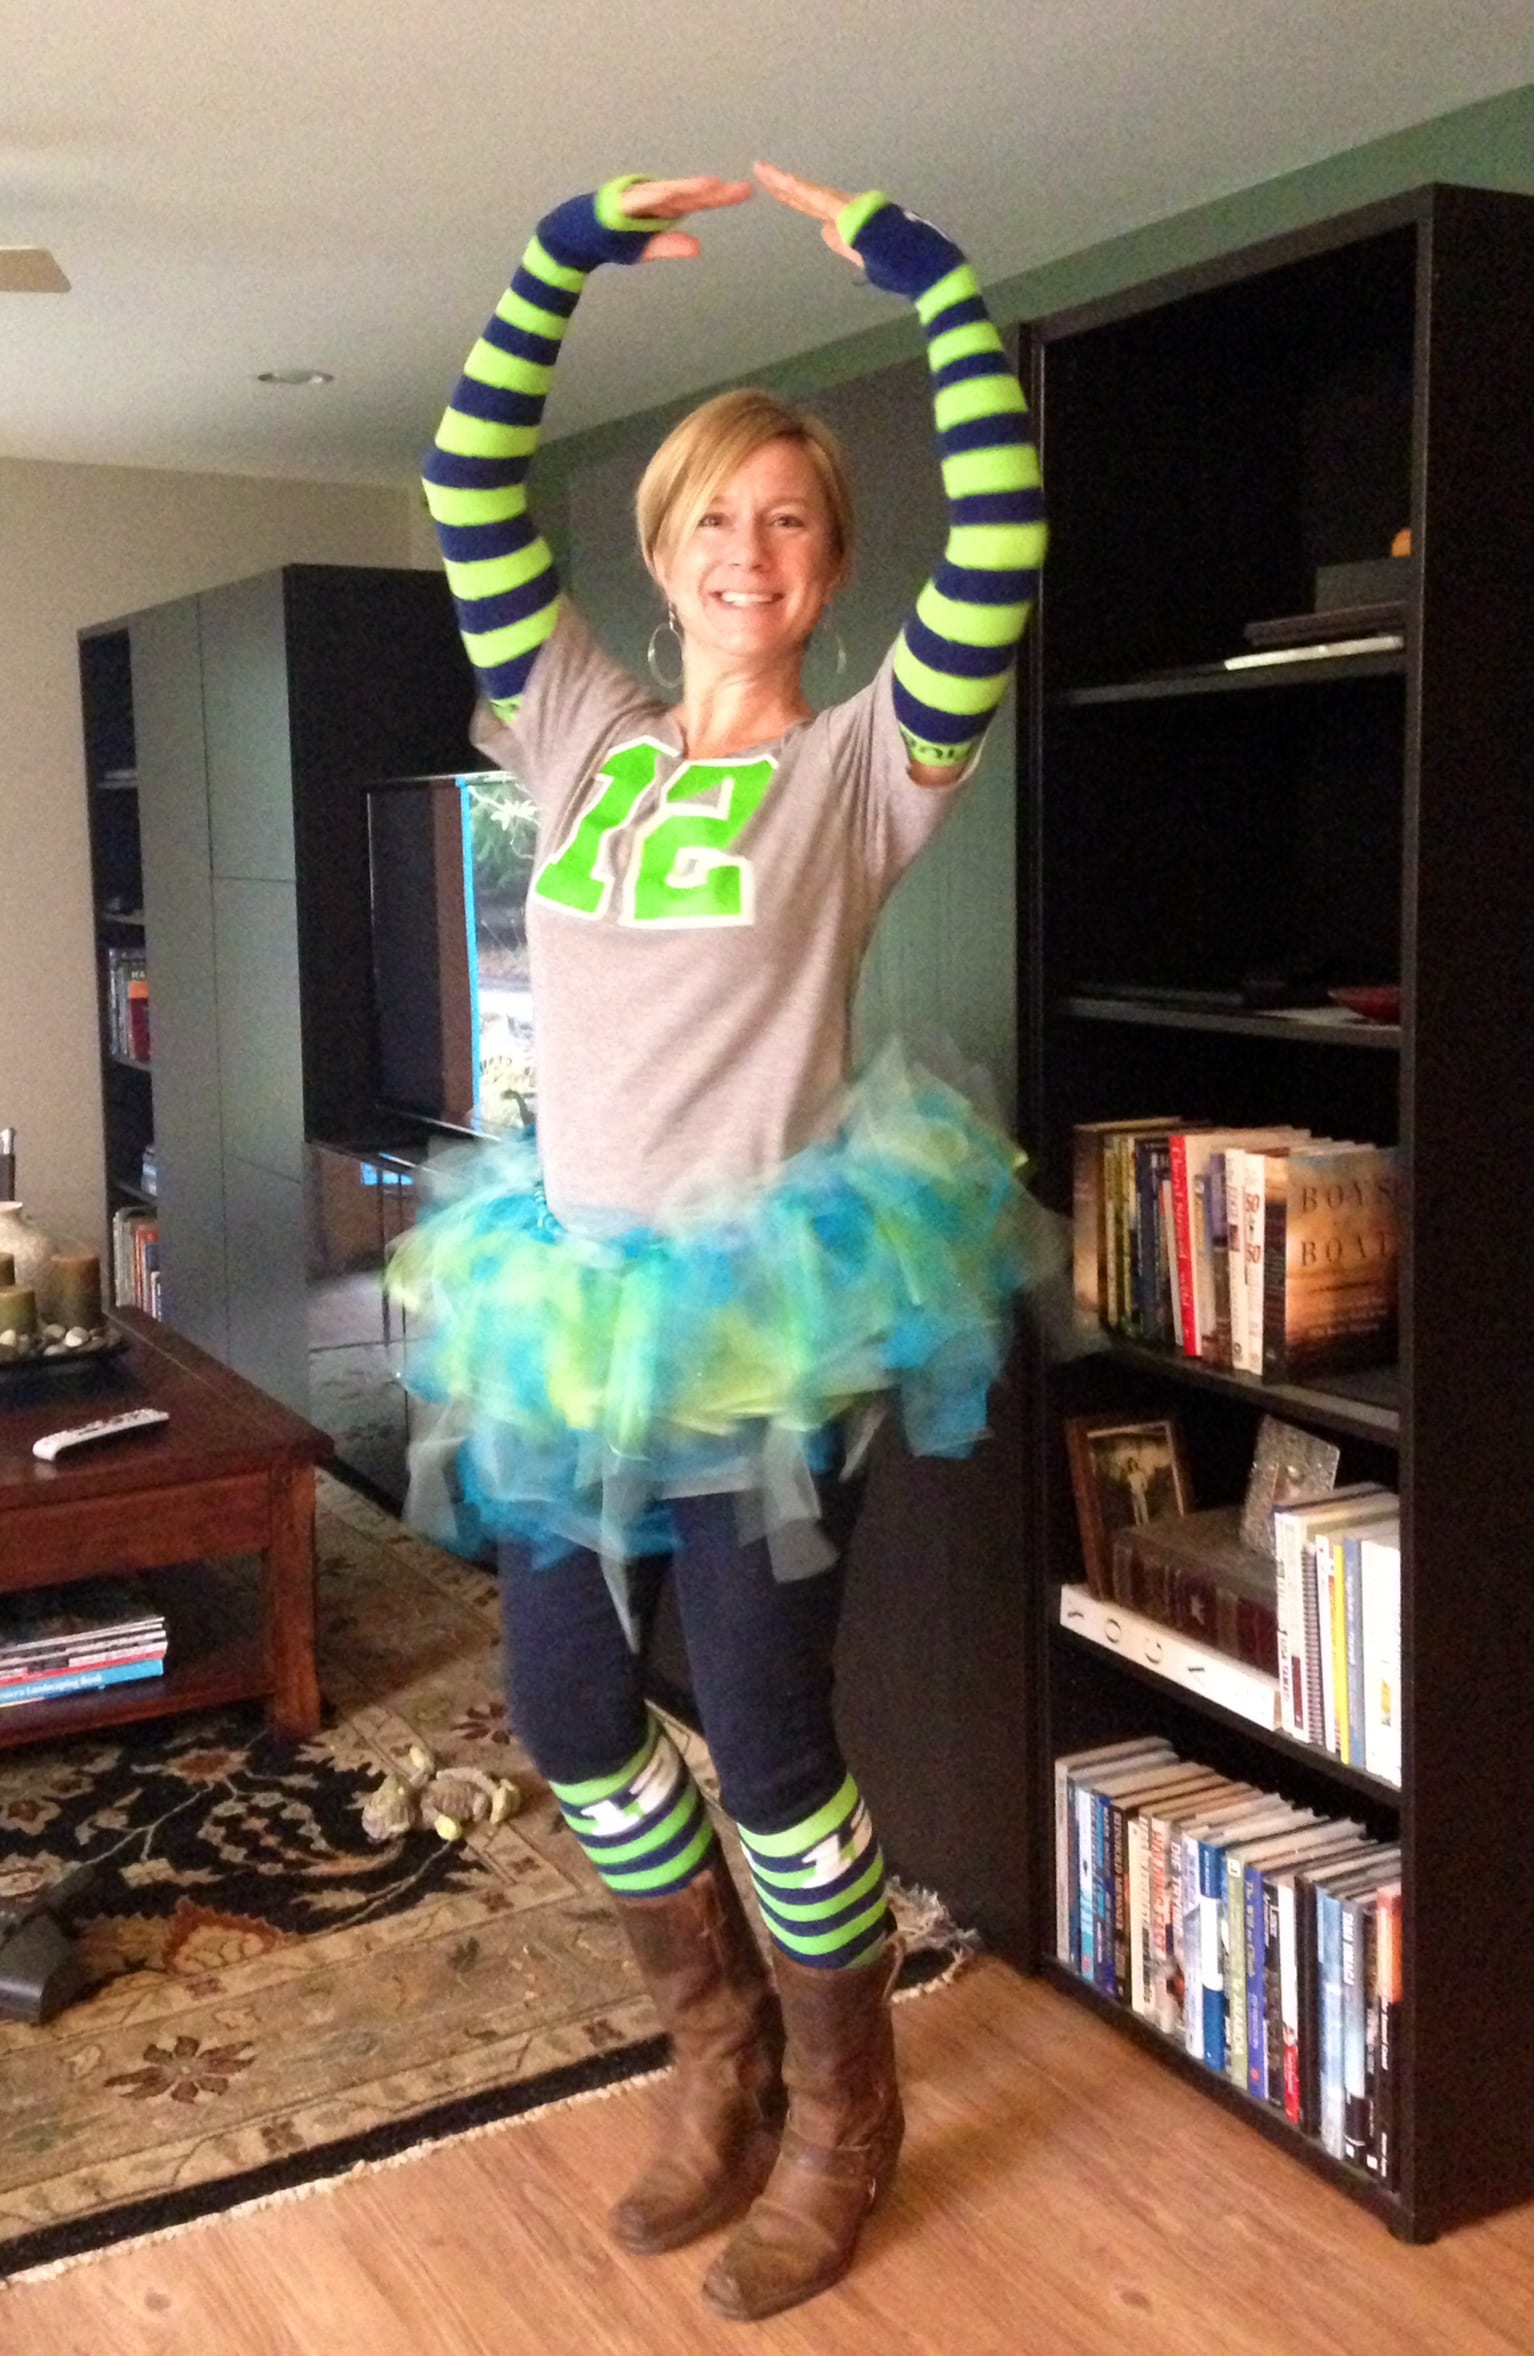 Our very own Beth Holmes and her tutu-go hawks!!!